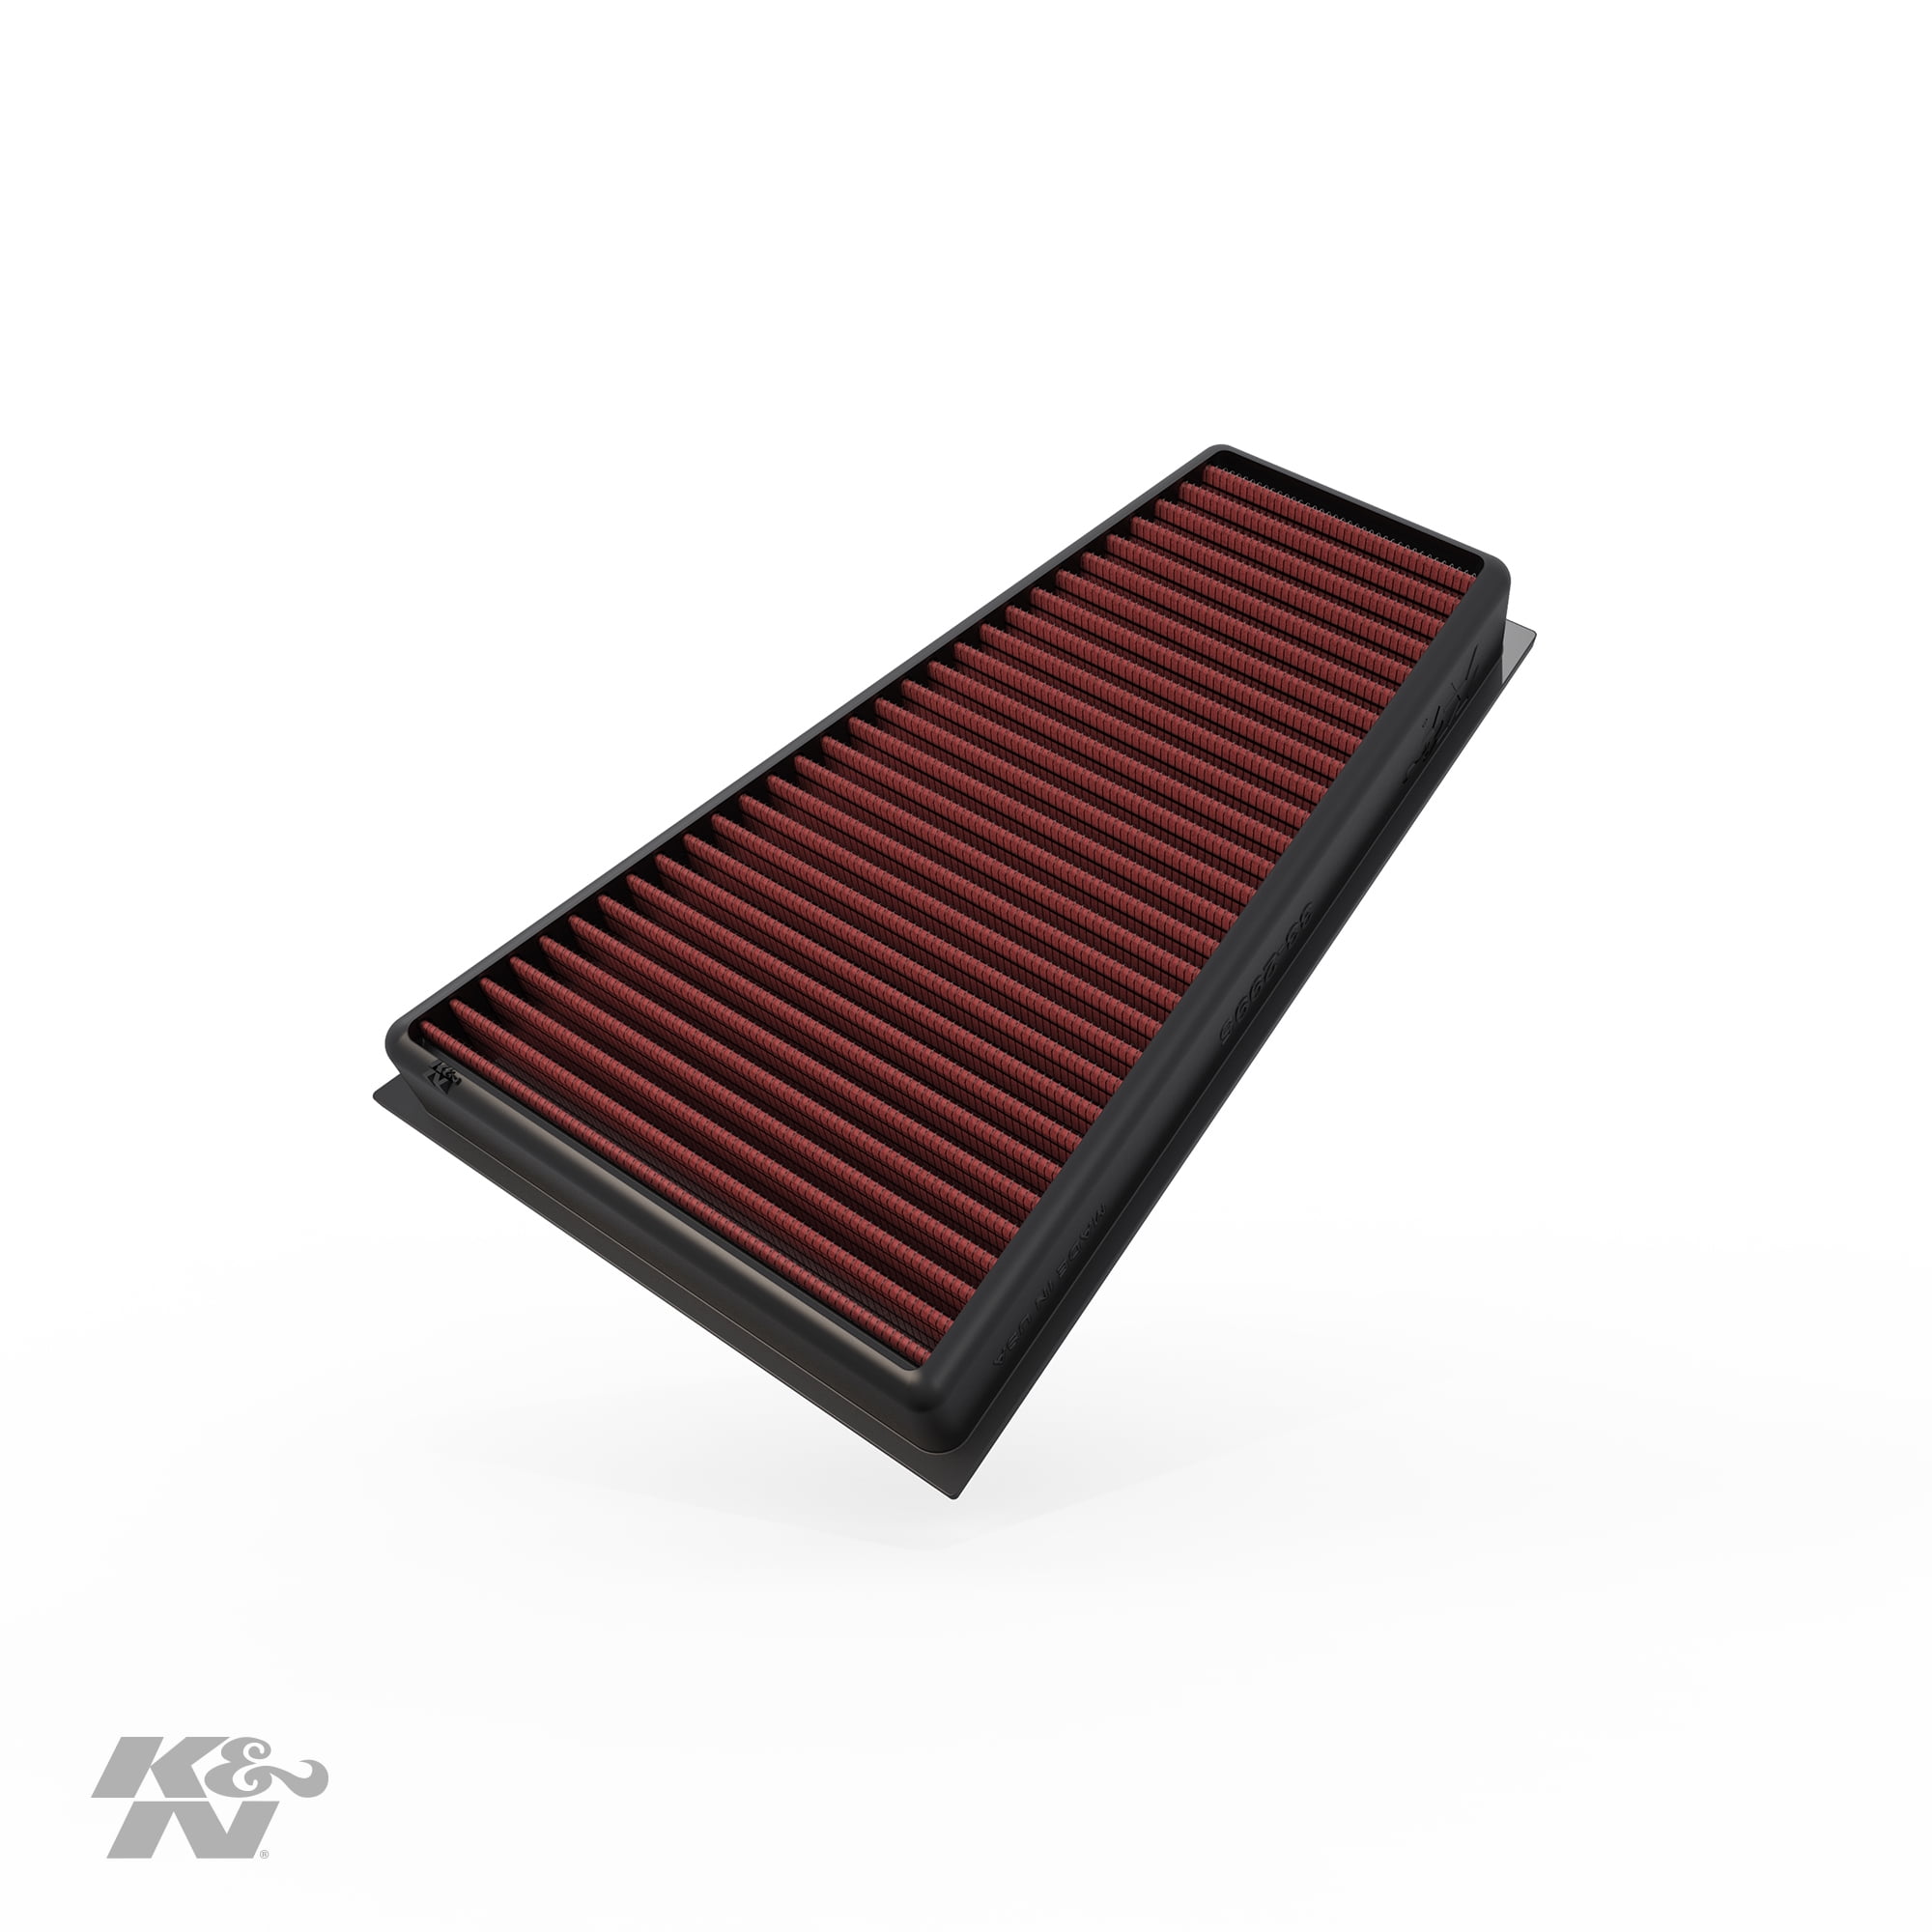 K/&N E-2320 High Performance Replacement Air Filter K/&N Engineering